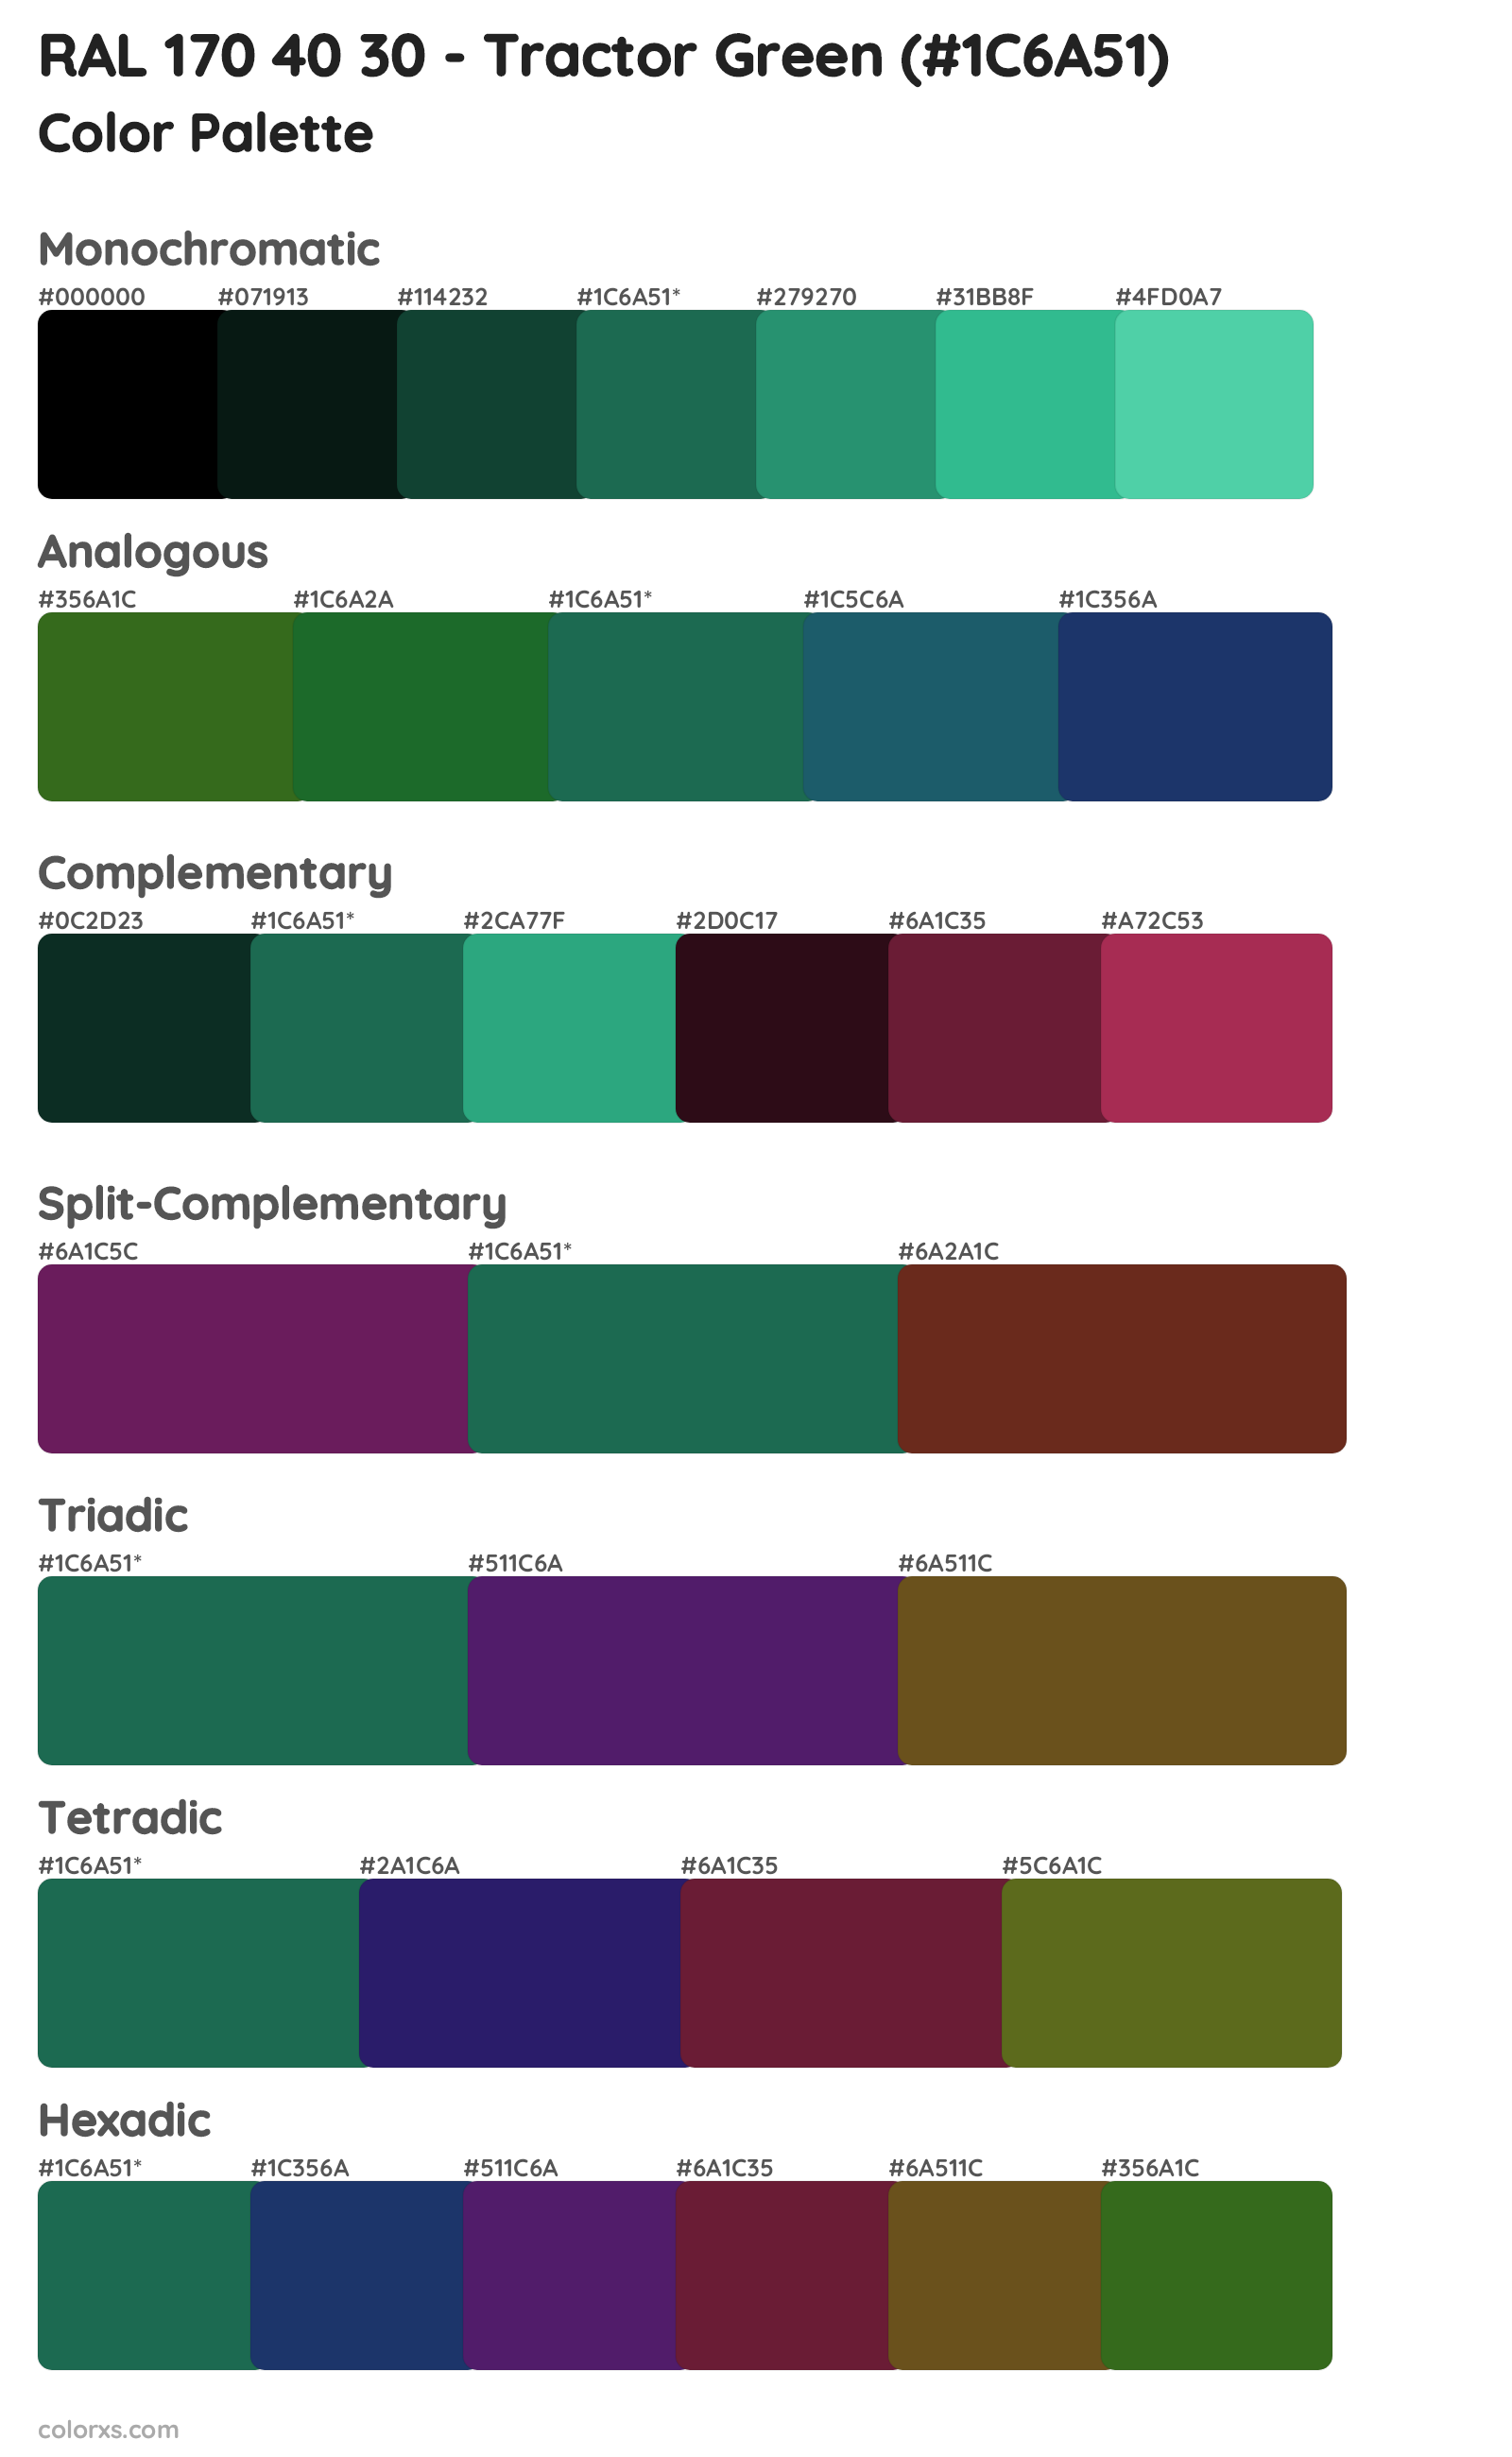 RAL 170 40 30 - Tractor Green Color Scheme Palettes